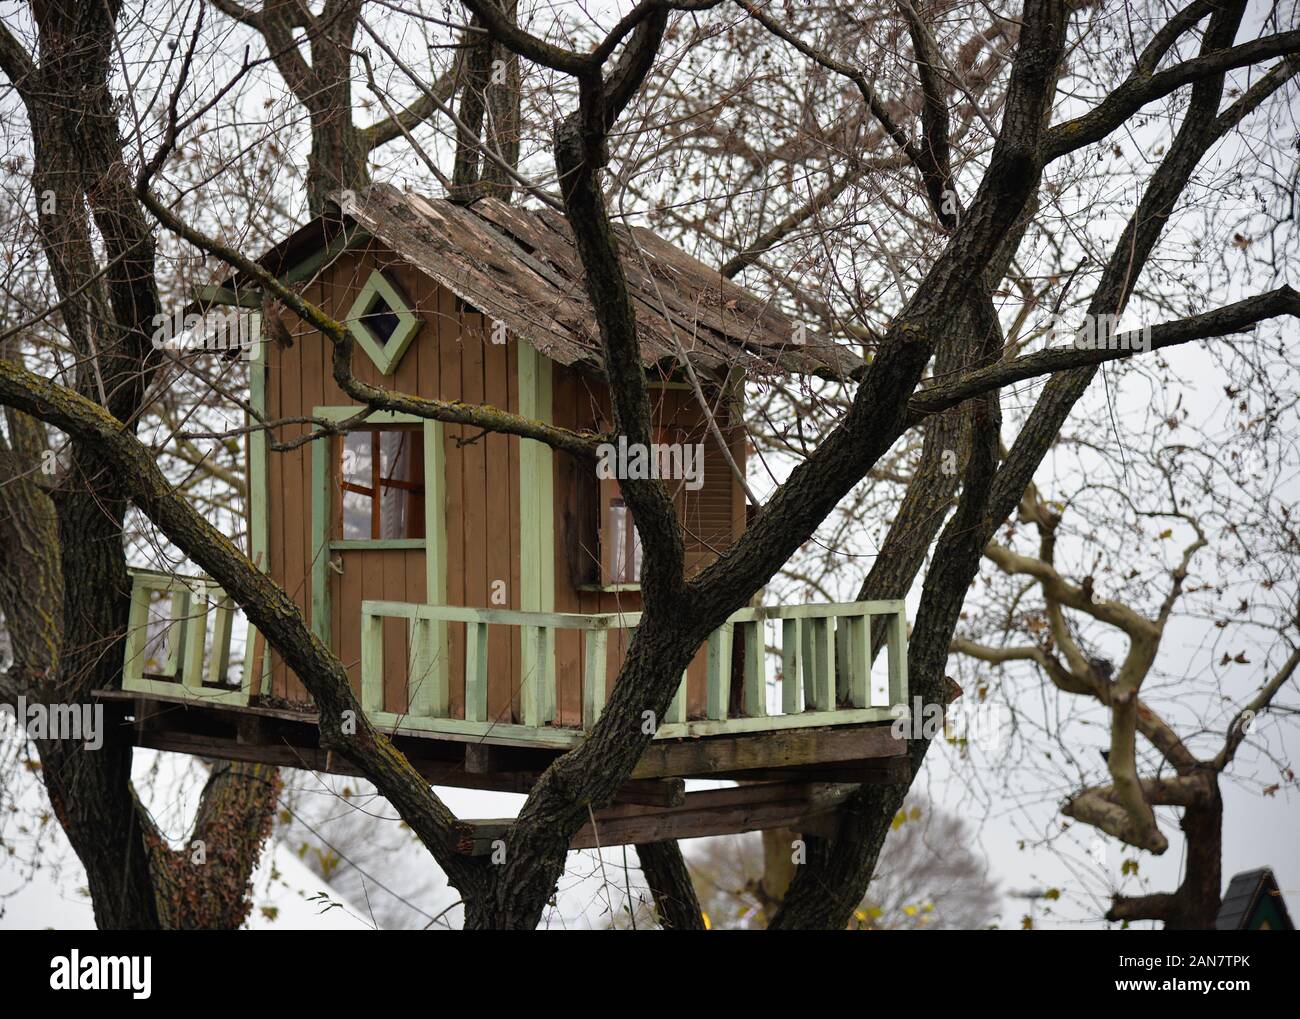 Tree house, used as decoration at the Mill of the elves, a Christmas bazaar taking place at Trikala, Greece. Stock Photo